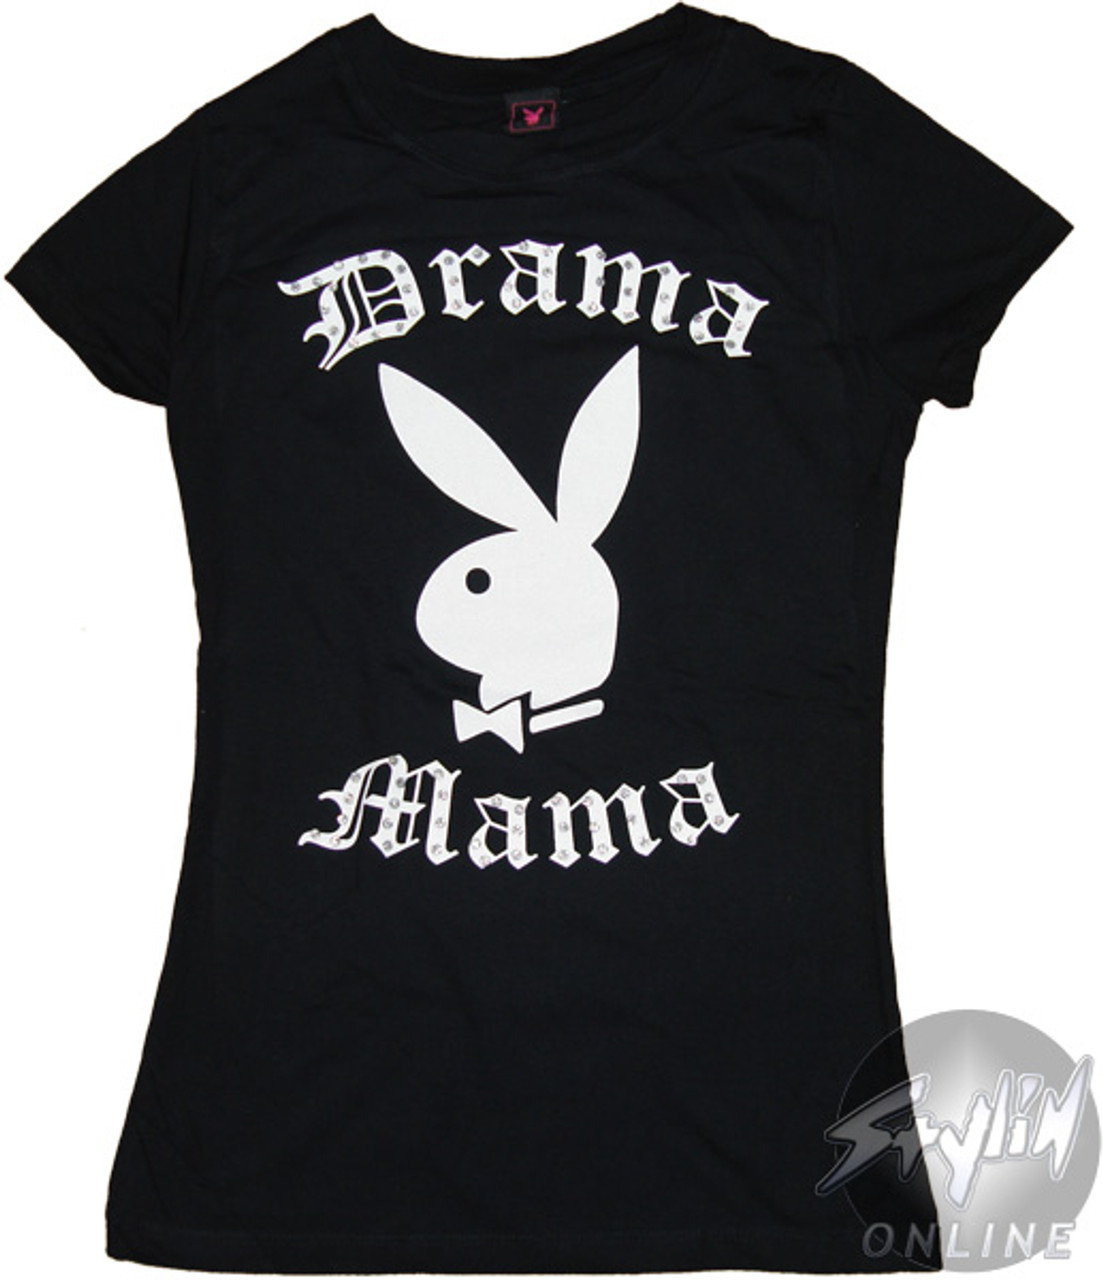 The Playboy T-Shirt: Official Playboy T-Shirts